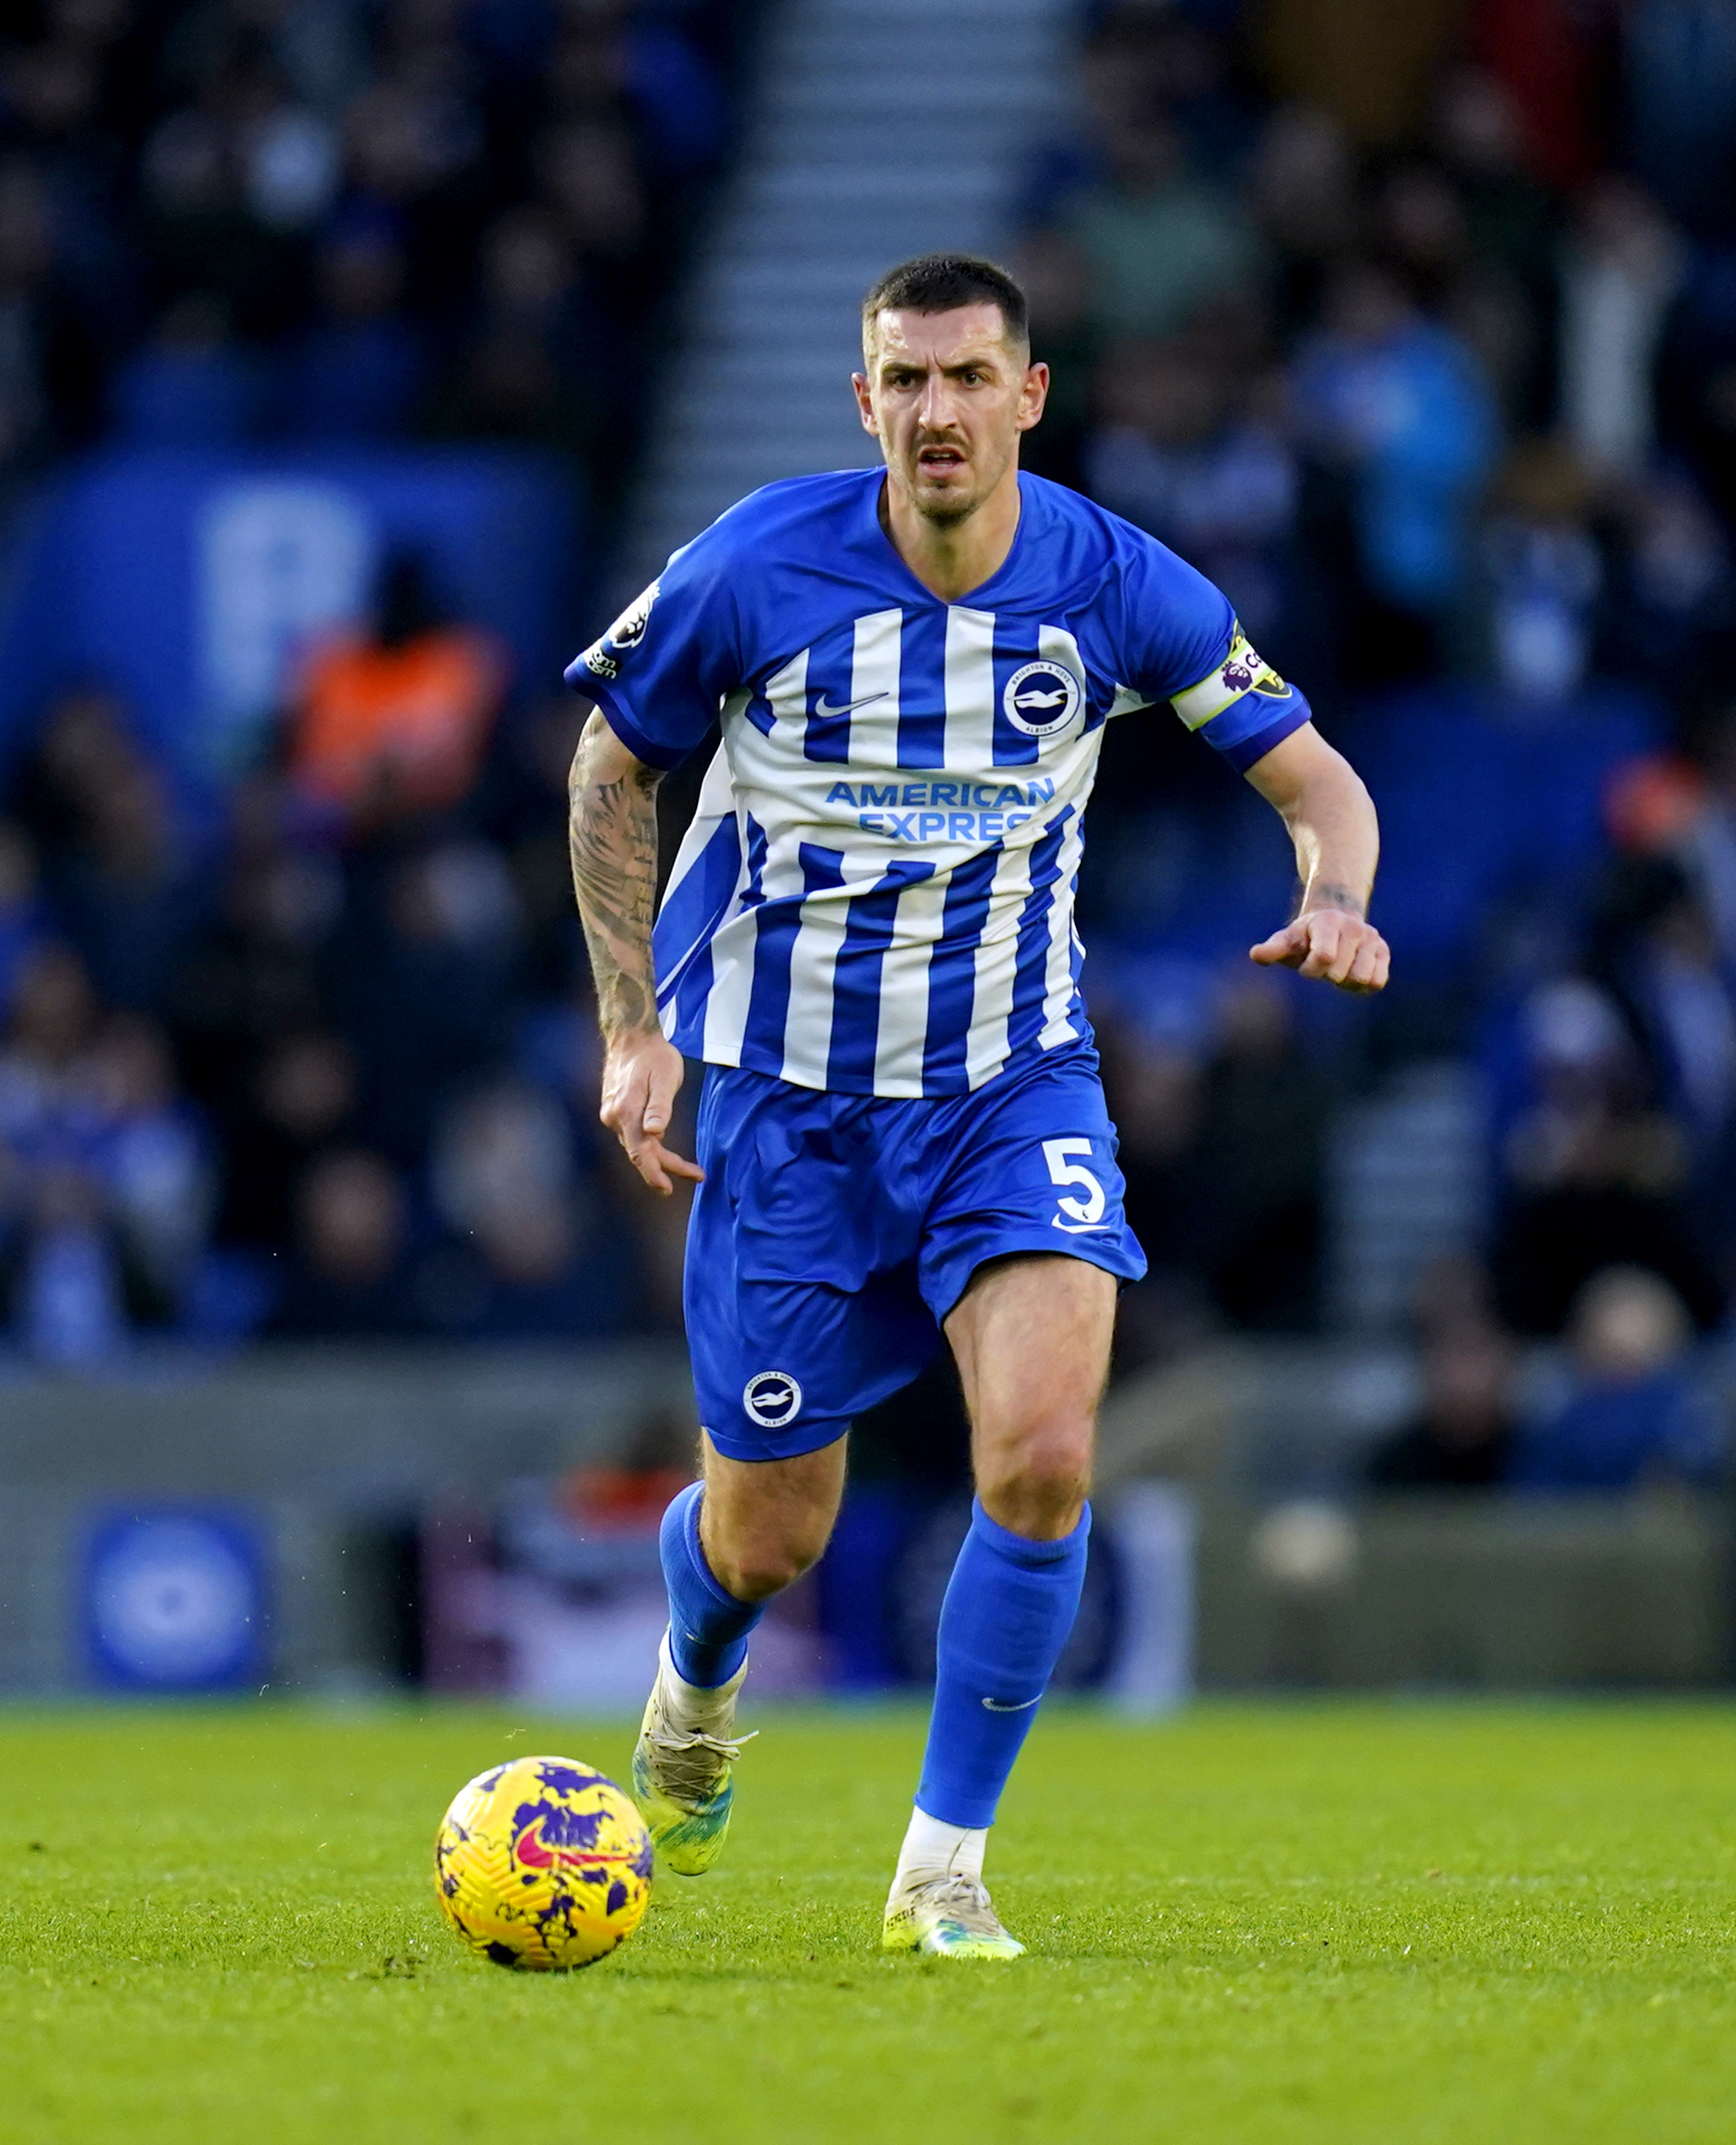 Lewis Dunk impressed at the back for Brighton